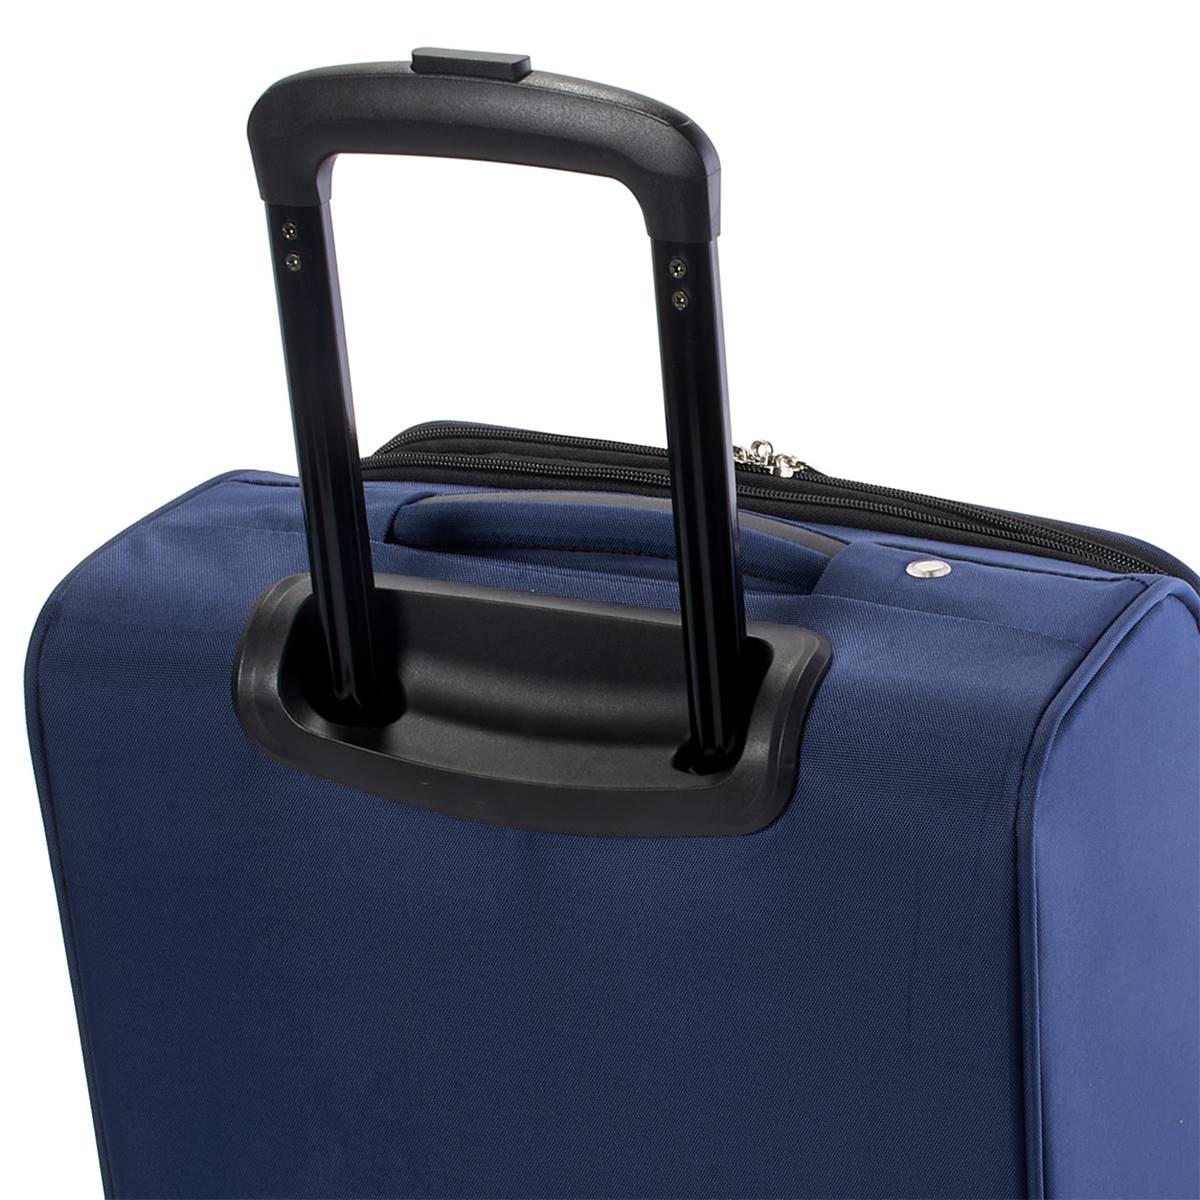 Nicole Miller New York  20in. Stripe Carry-On Luggage - Navy